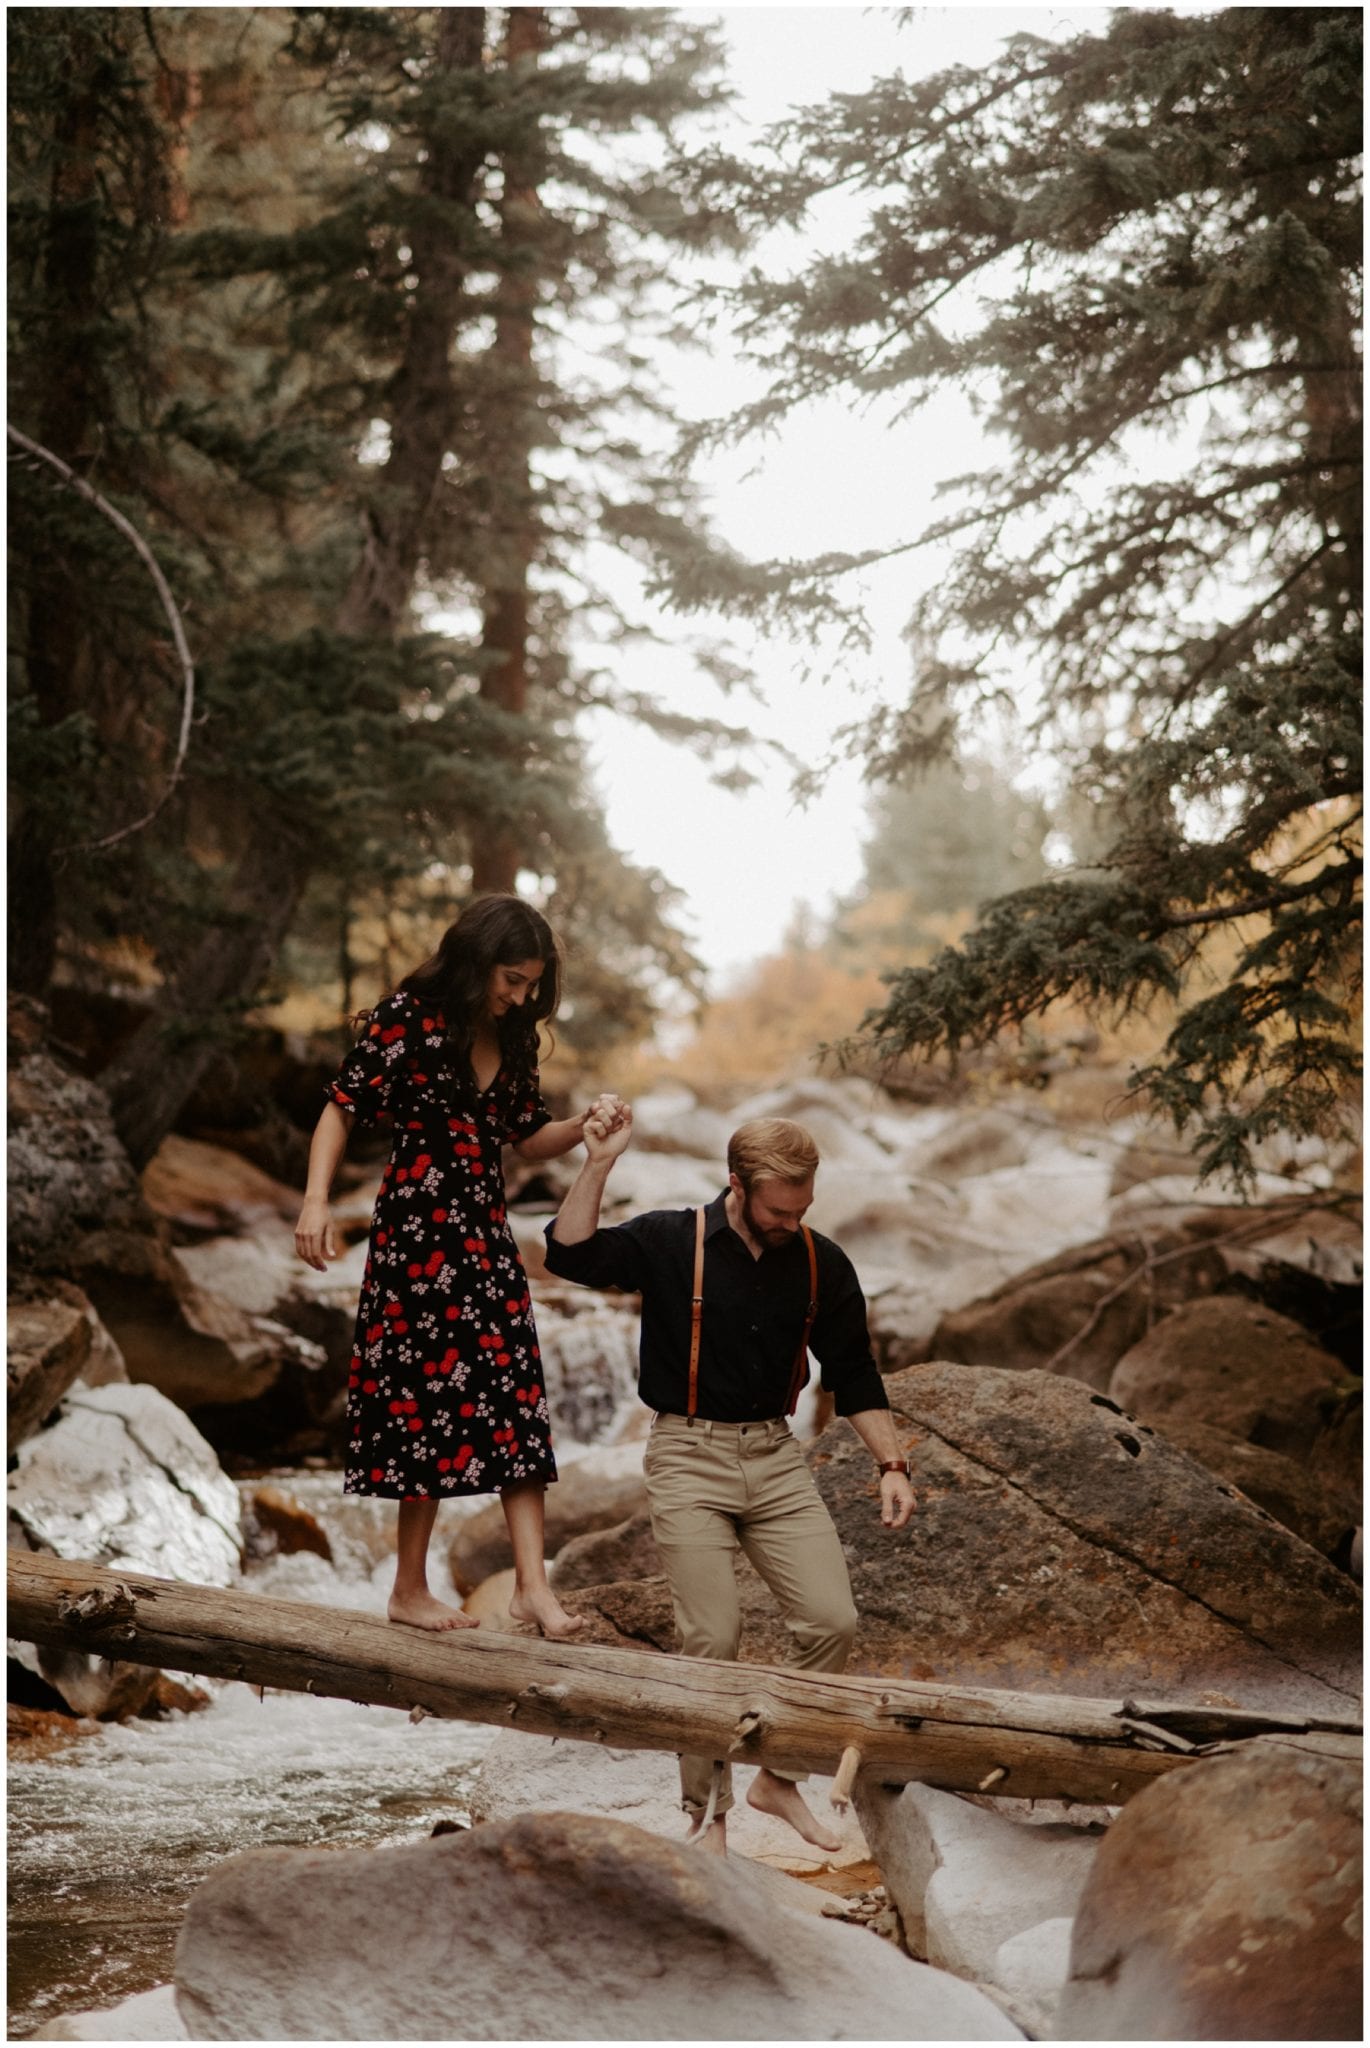 Guanella Pass Engagement Session during Peak Fall Foliage